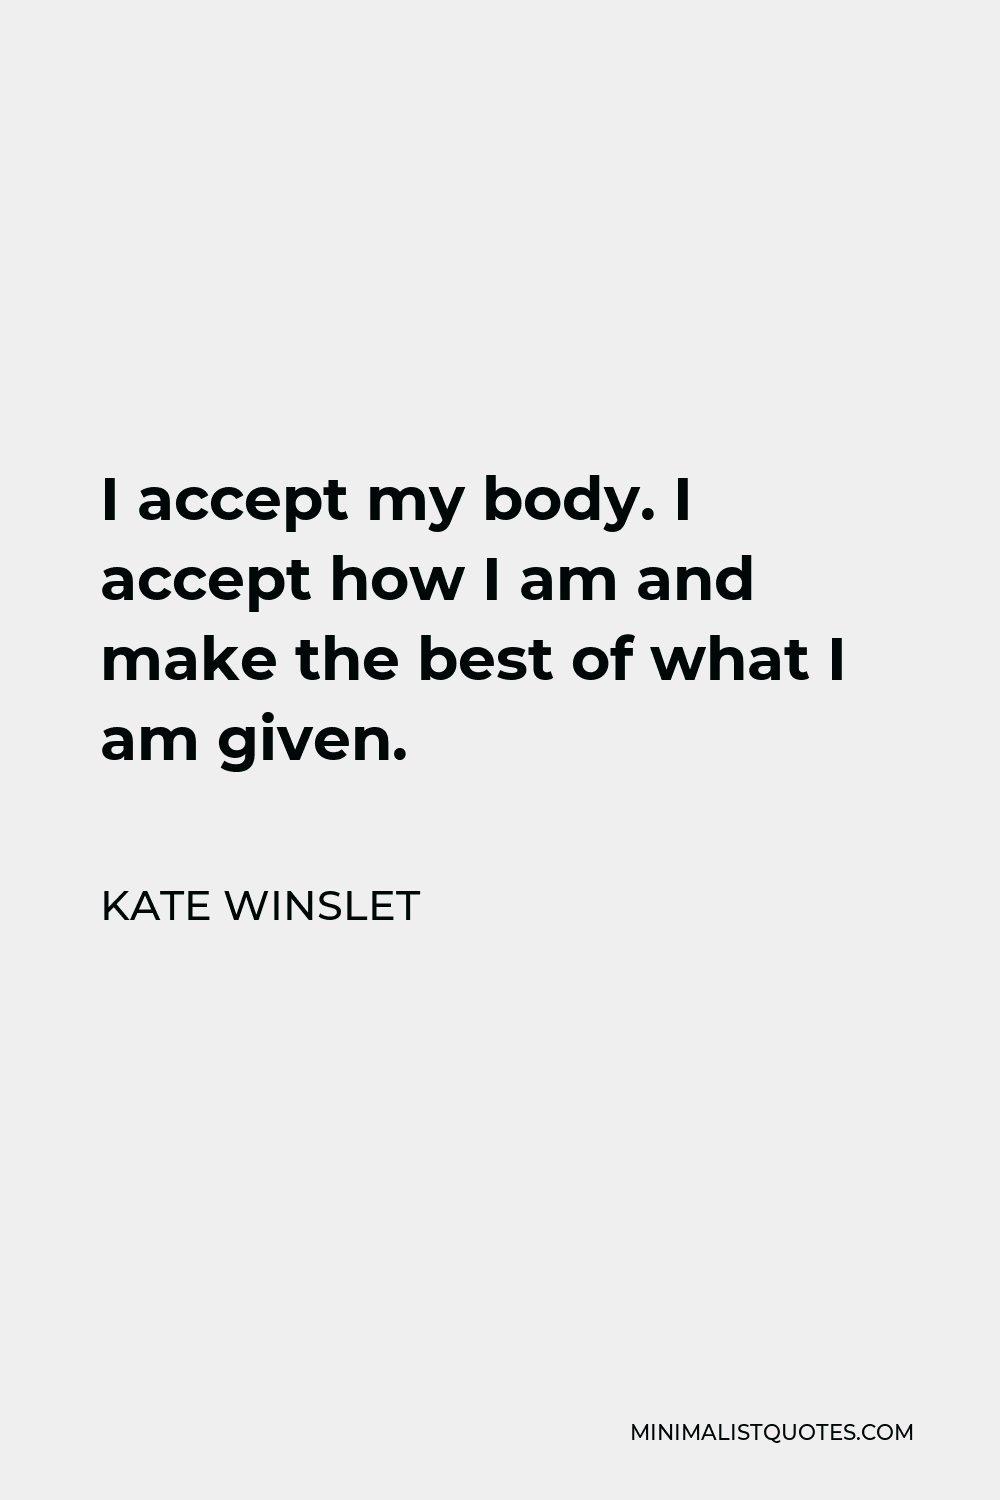 Kate Winslet Quote - I accept my body. I accept how I am and make the best of what I am given. Children orientate towards examples. That’s why I talk solely positive about my body in front of my daughter.